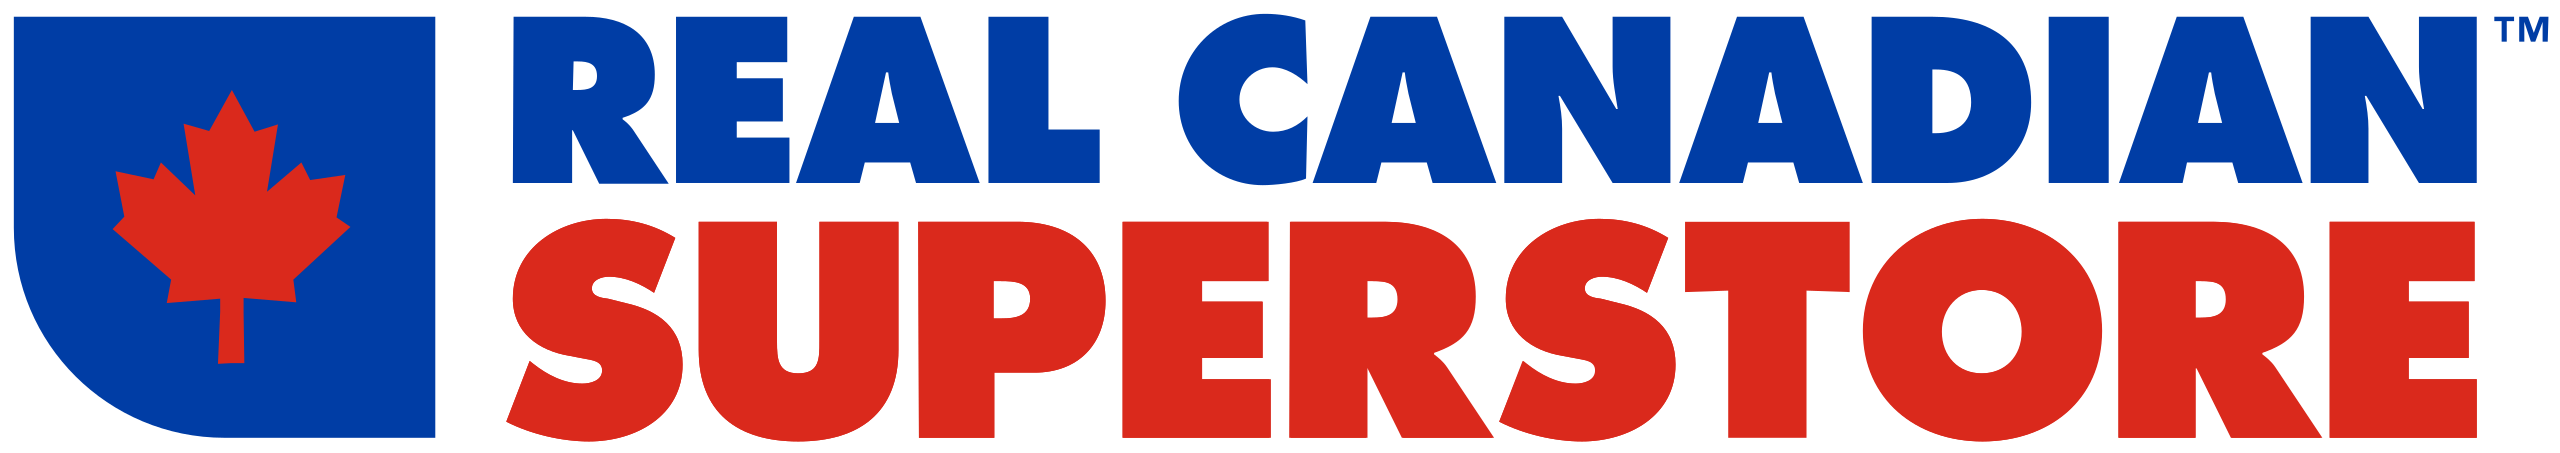 2560px-Real_Canadian_Superstore_logo.svg.png